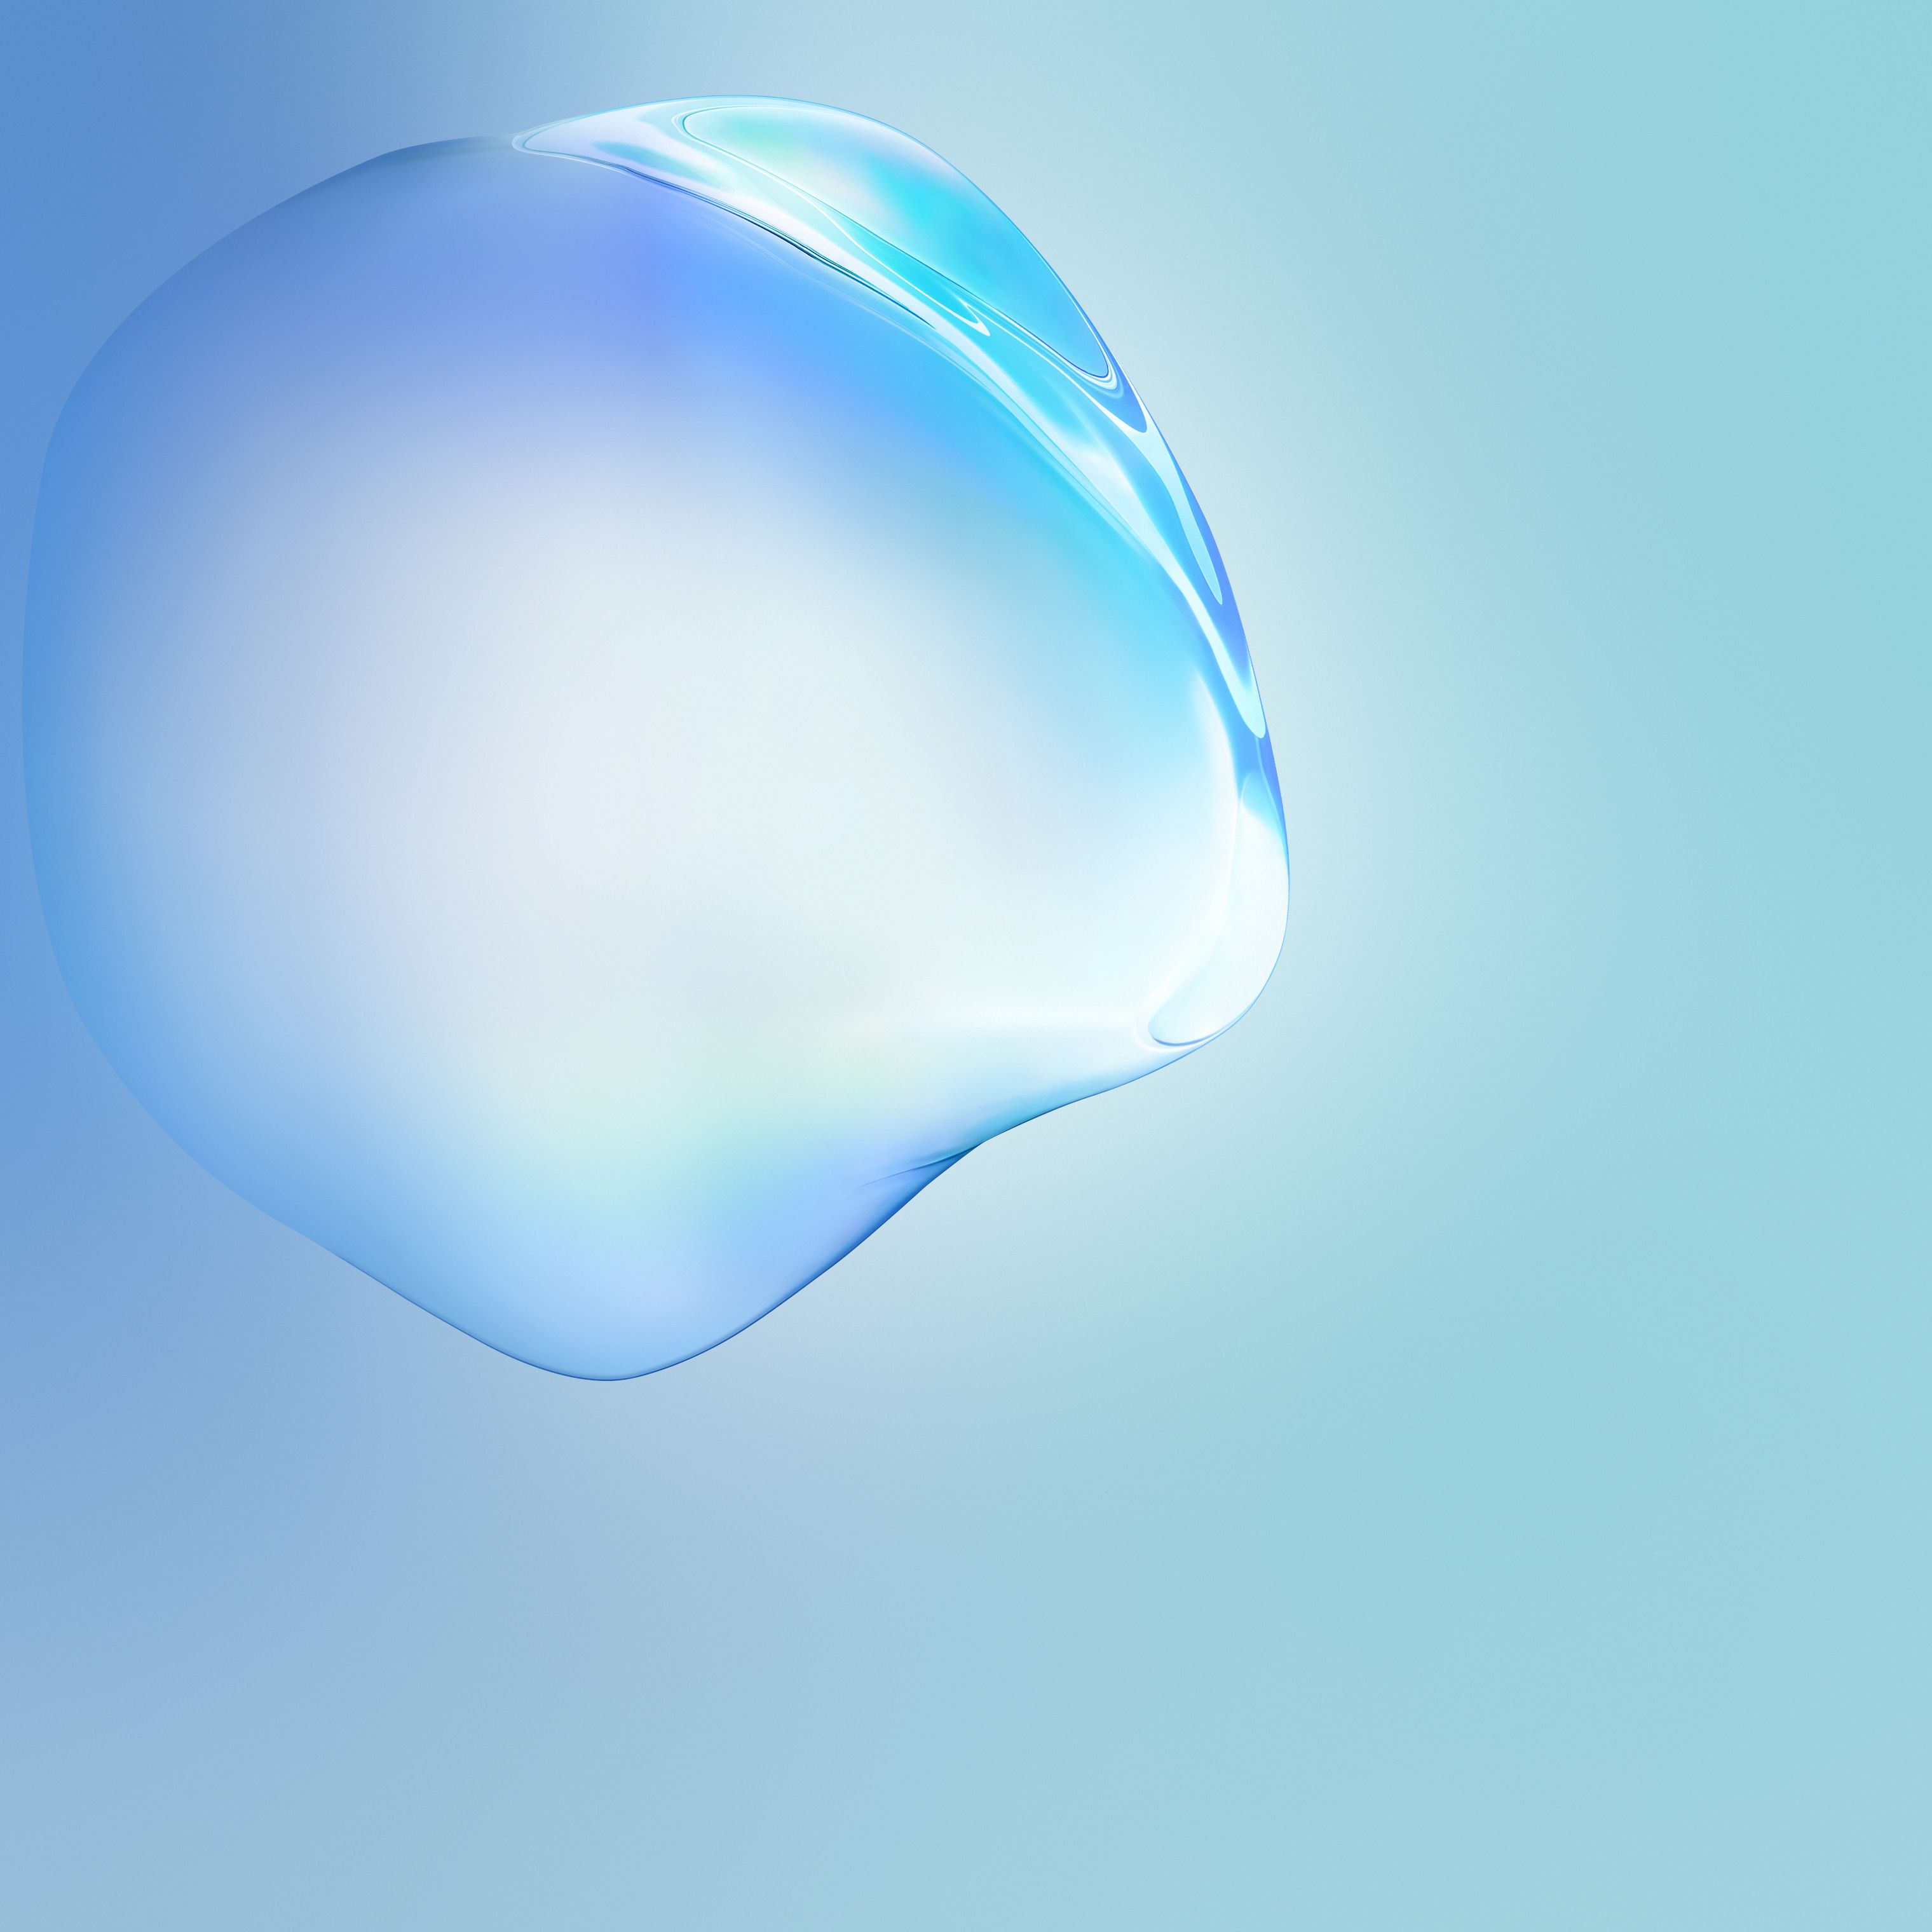 Samsung Galaxy Note10 4K Wallpaper, Bubble, Blue, Stock, Android Abstract